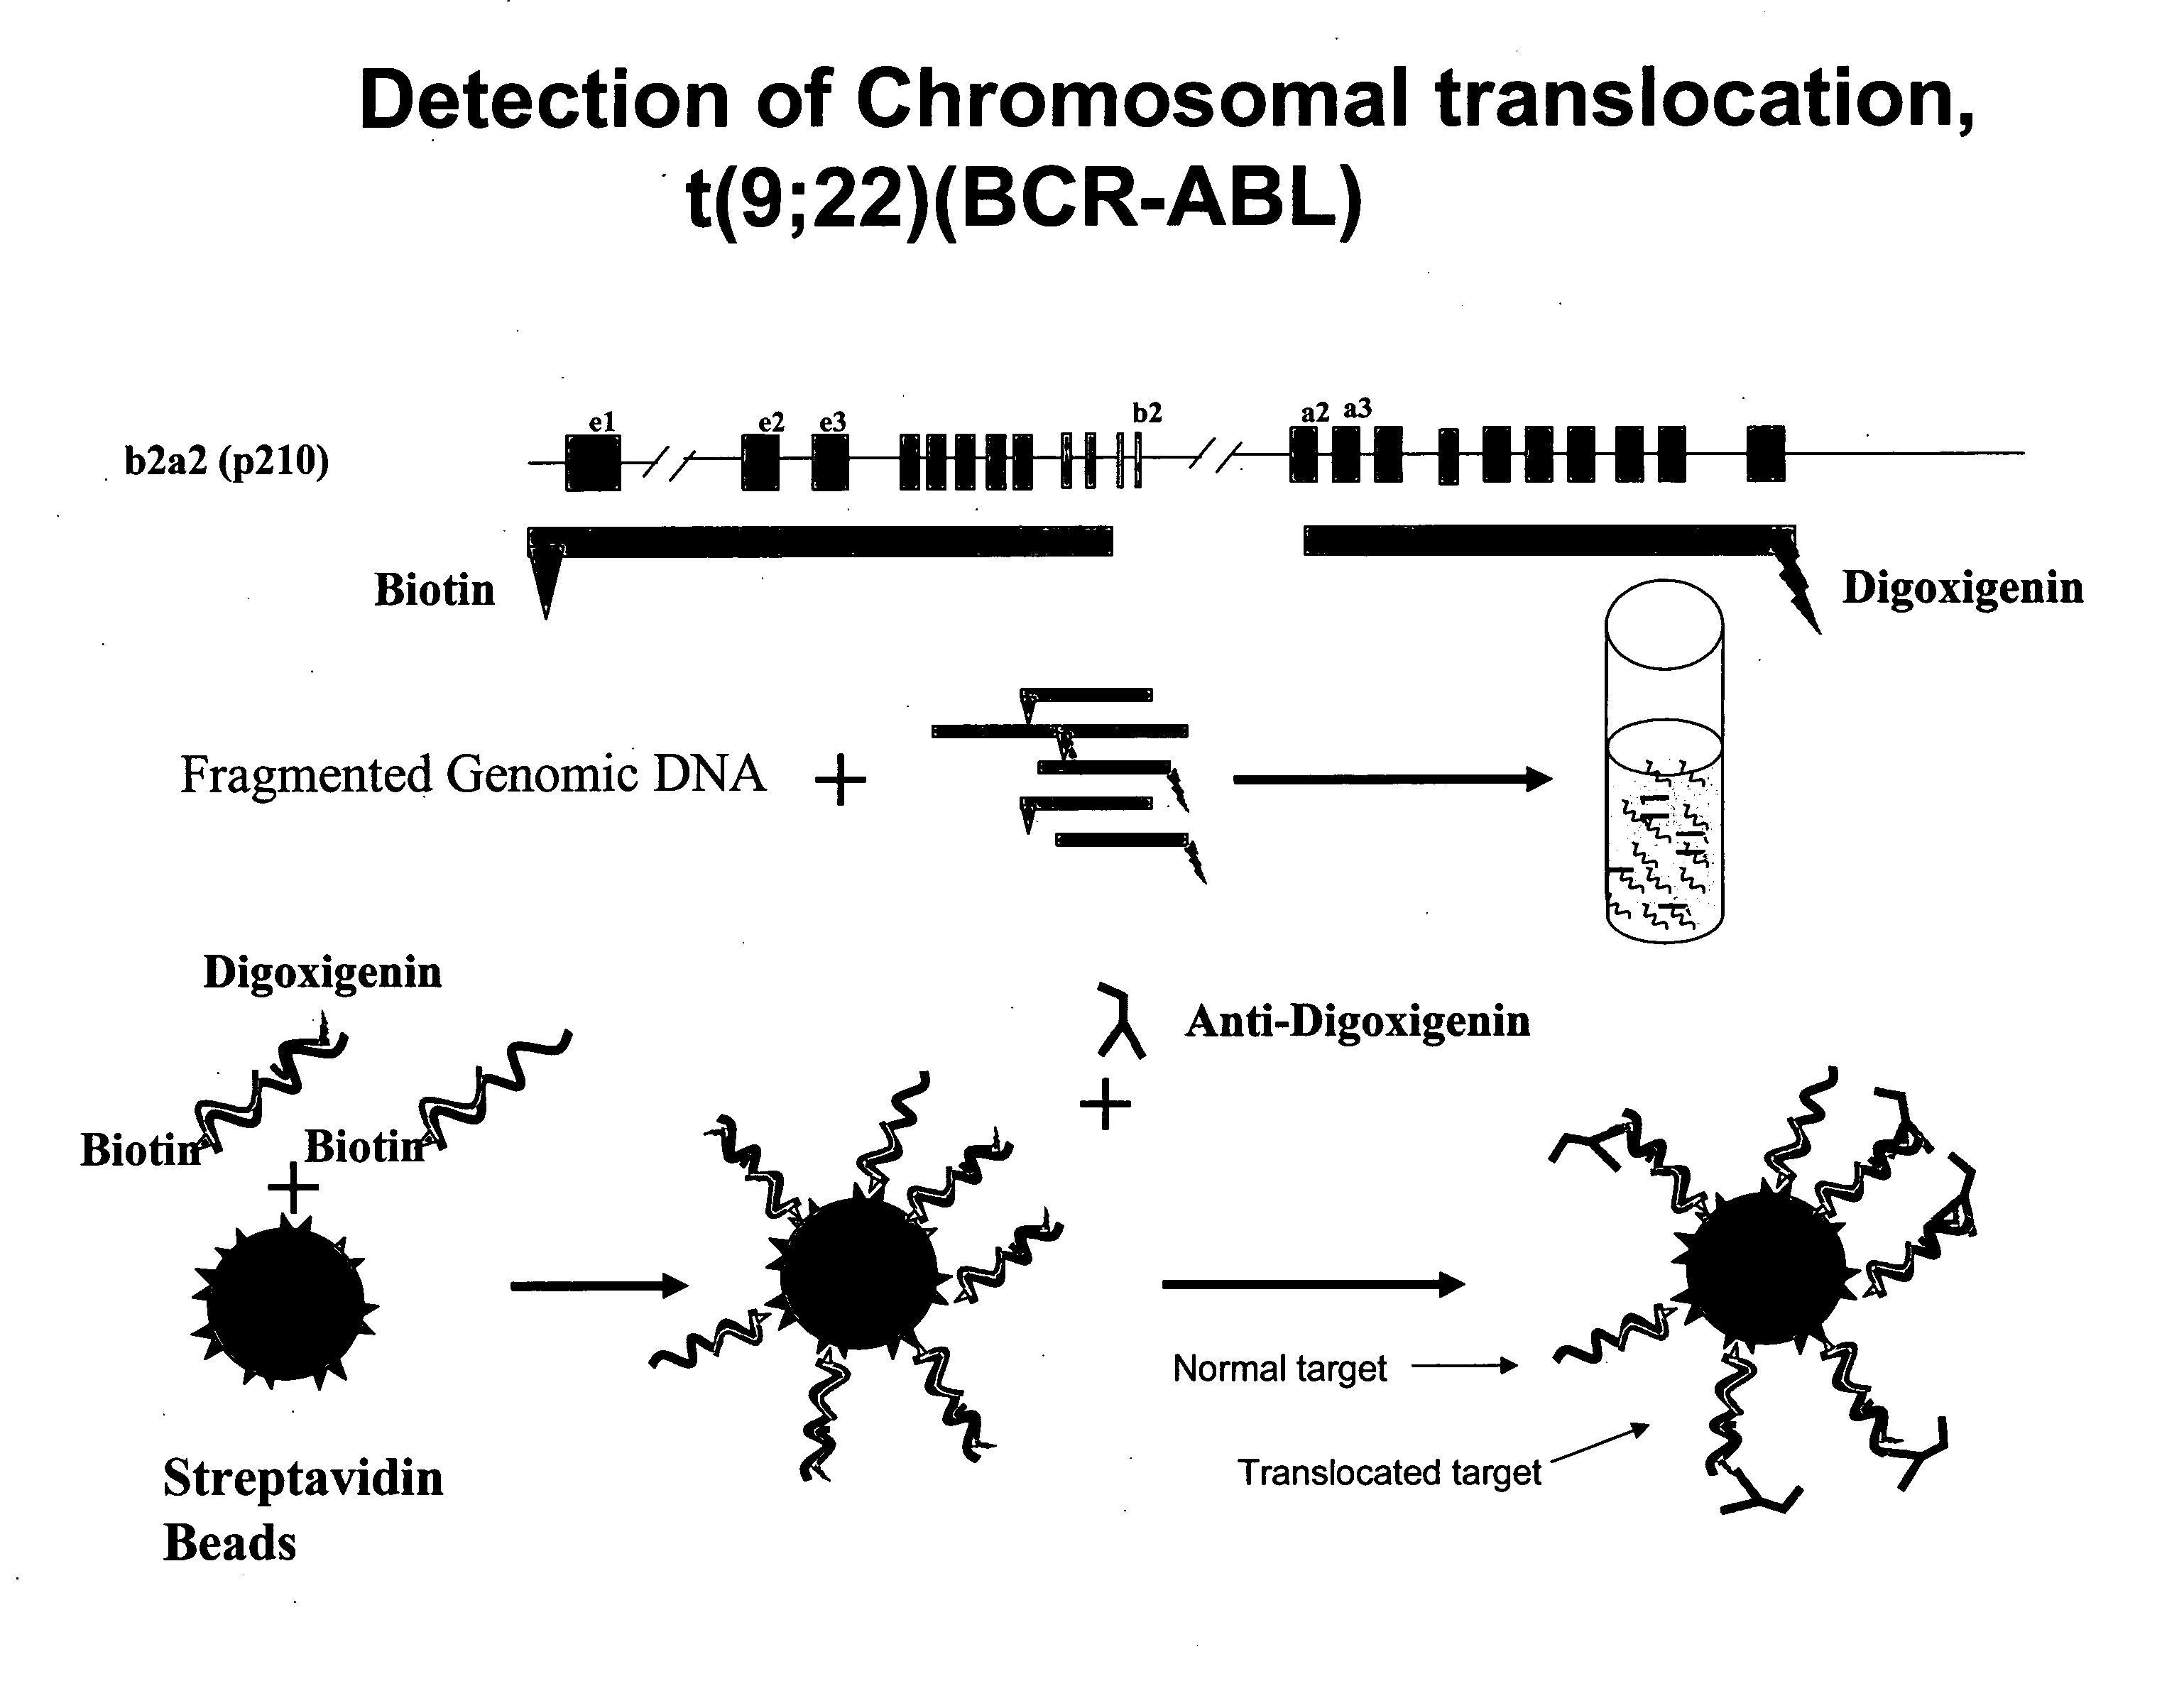 Non-in situ hybridization method for detecting chromosomal abnormalities